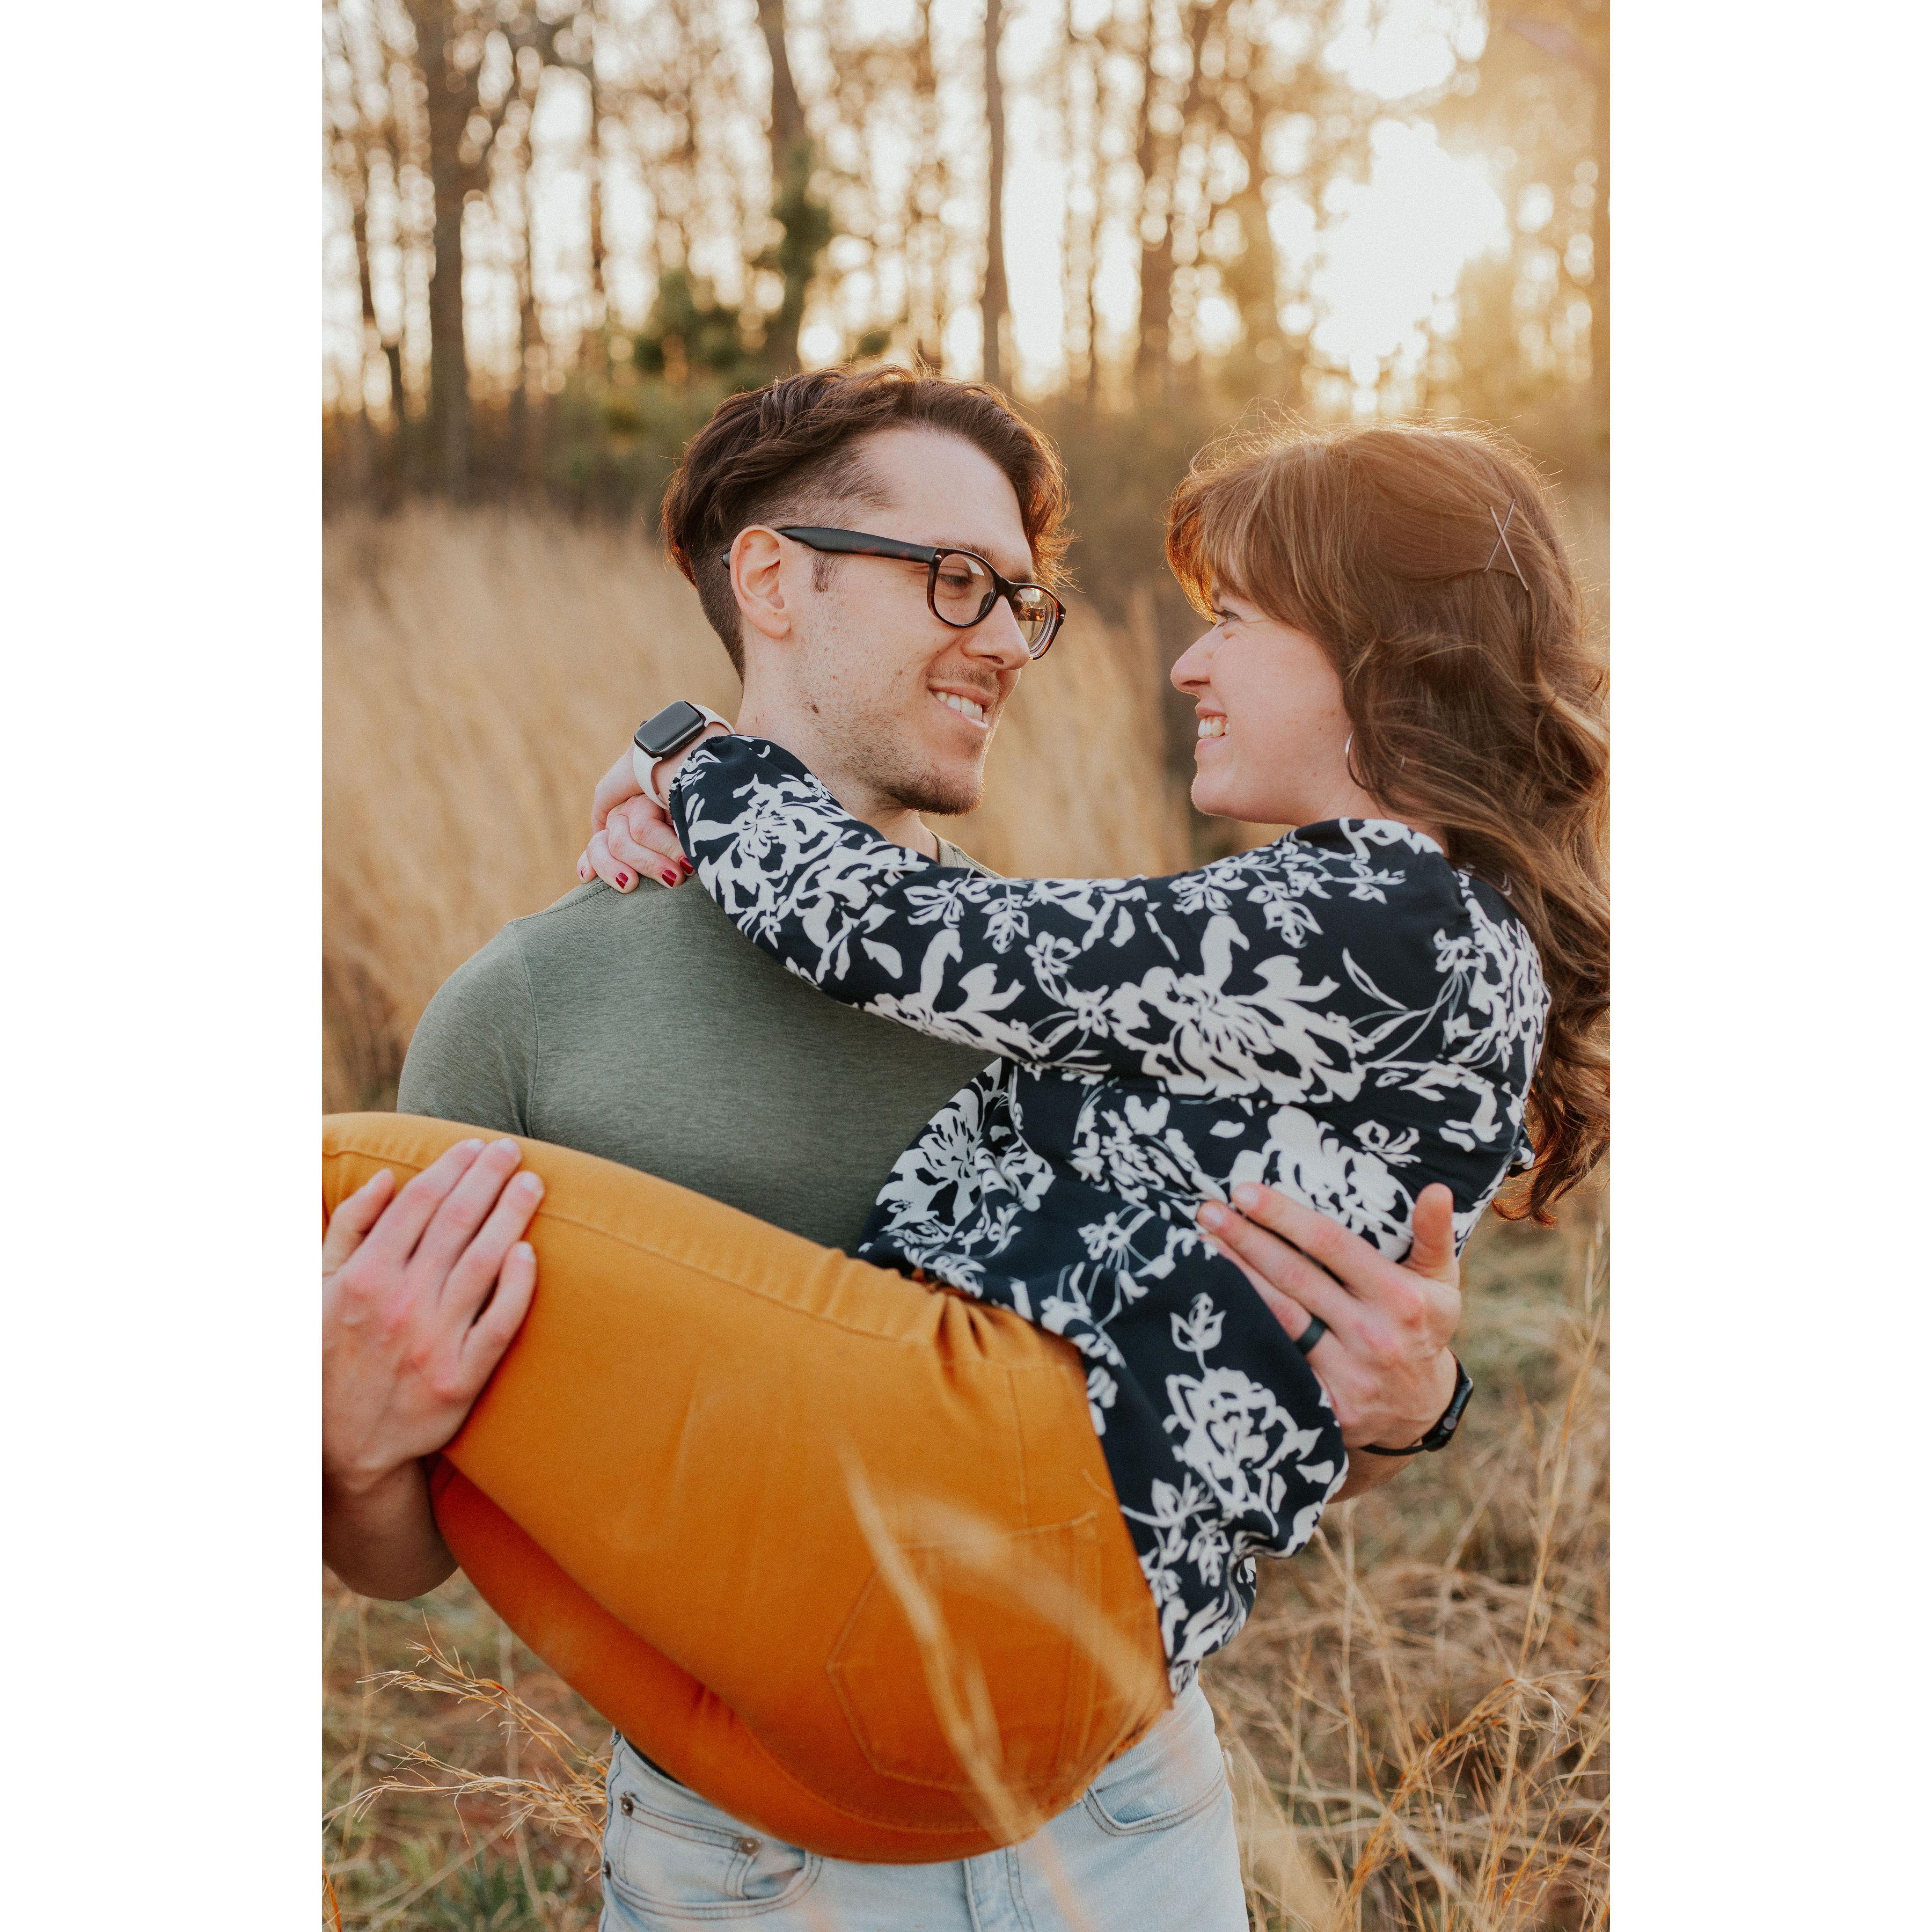 Engagement photos by Casey Jones (Pinnacle Photography)!